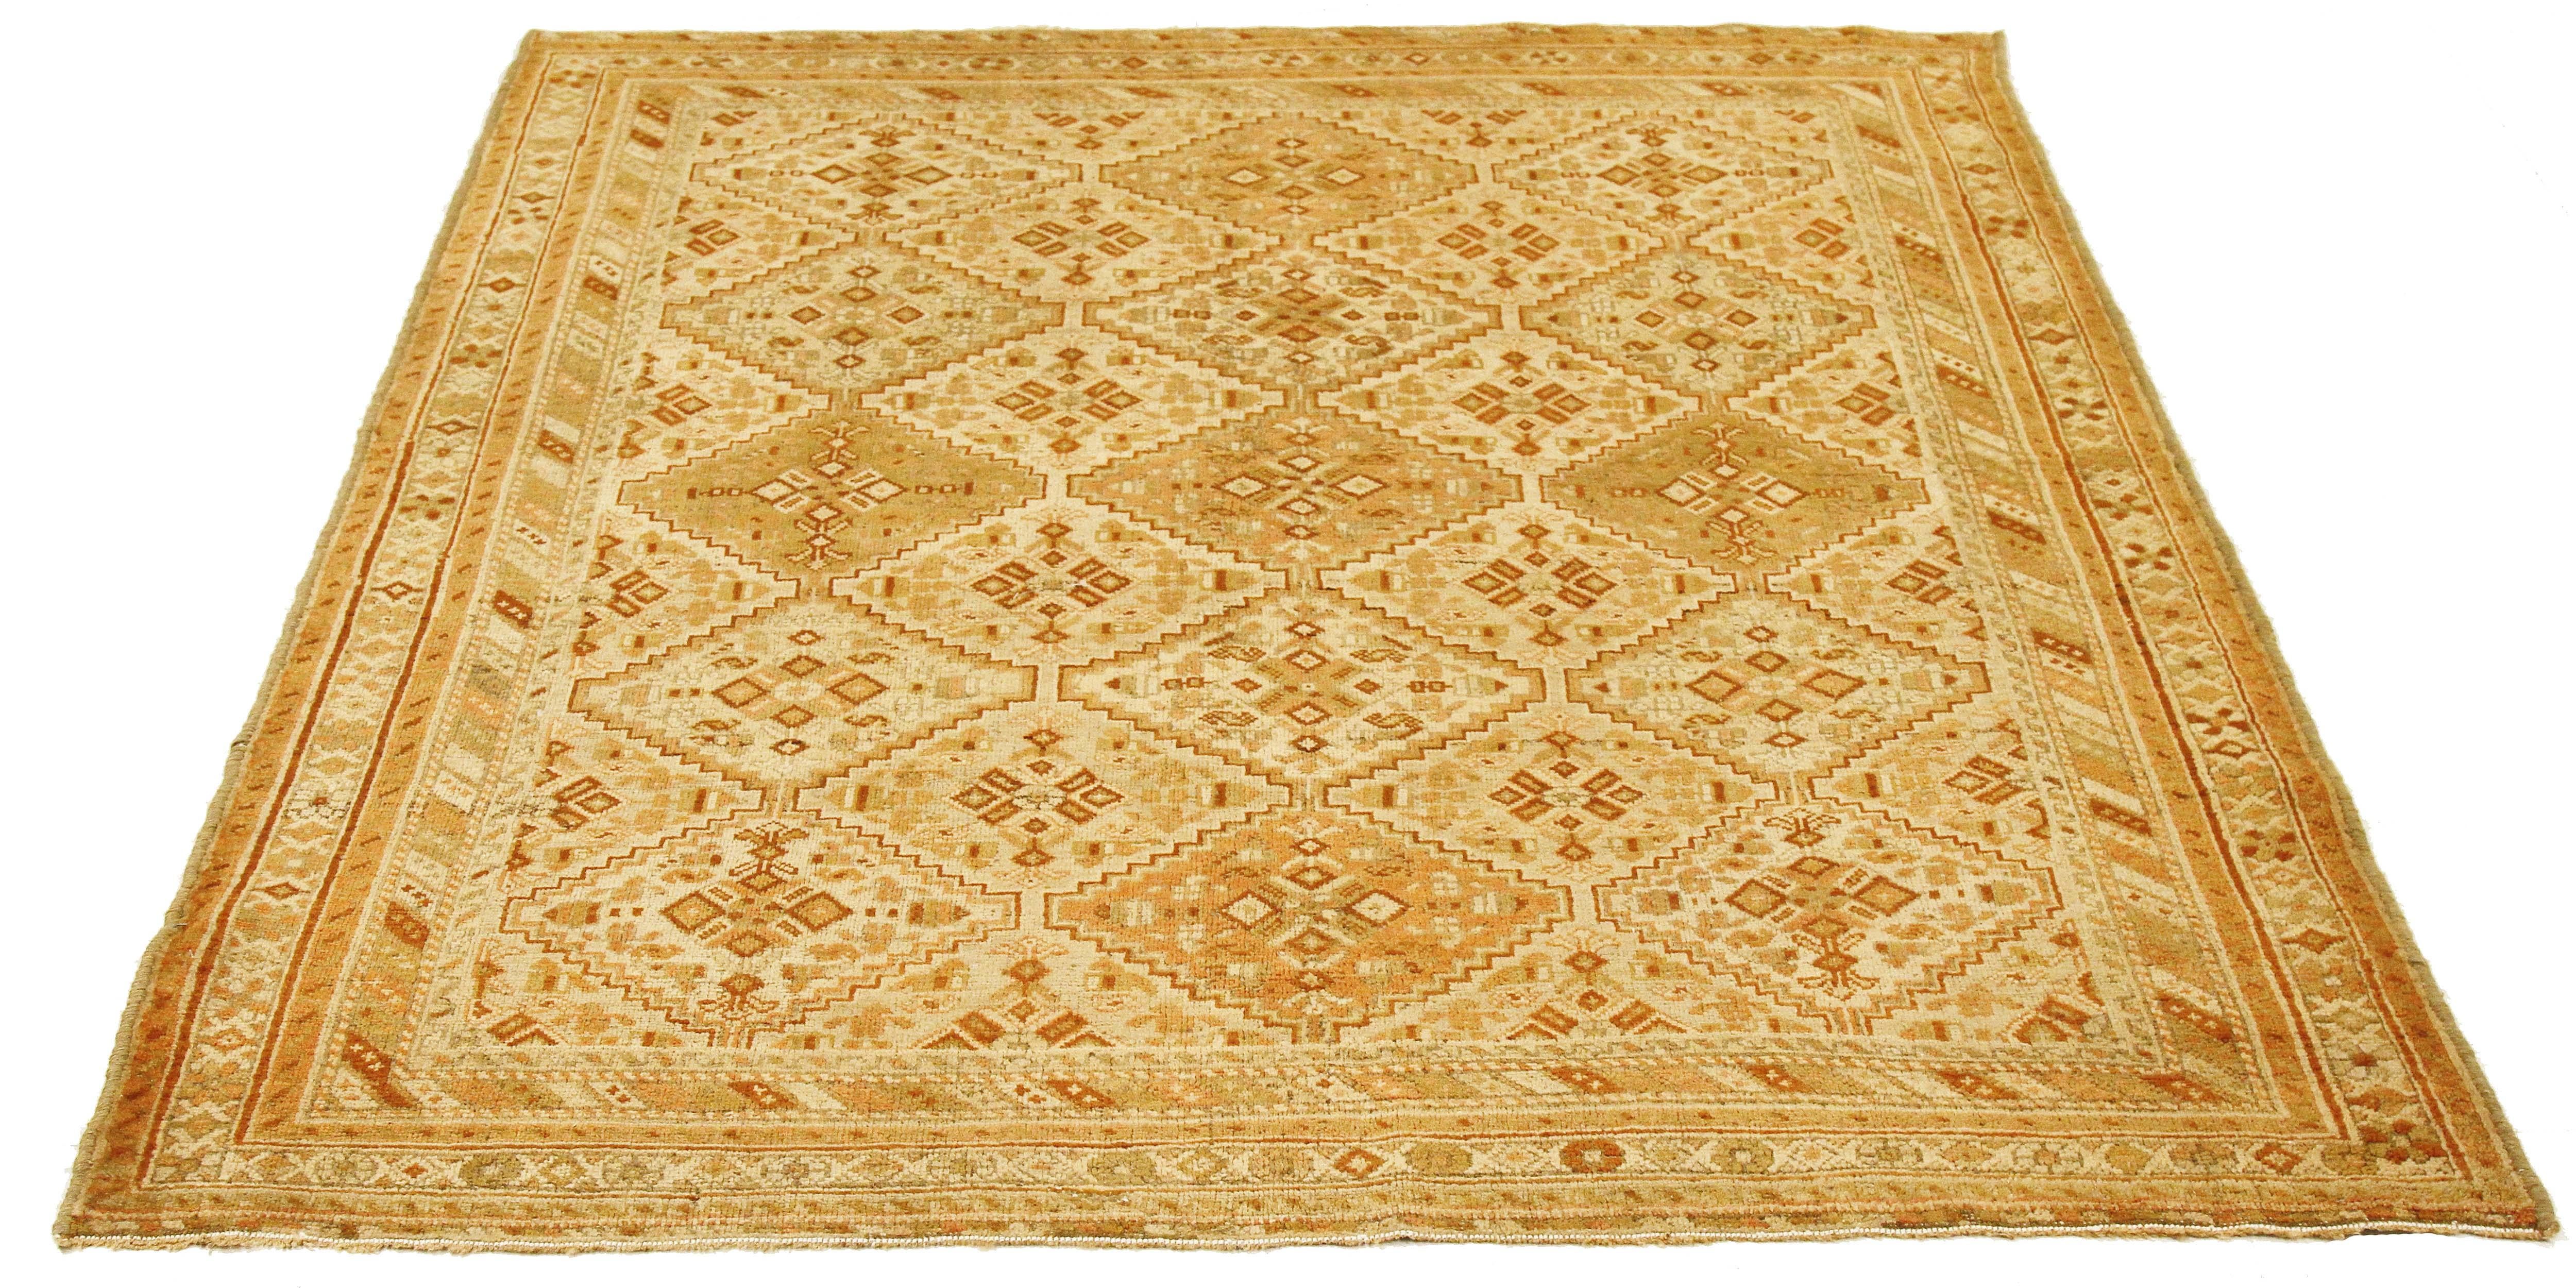 Antique Persian Sirjan rug handwoven from the finest sheep’s wool and colored with all-natural vegetable dyes that are safe for humans and pets. It’s a traditional Sirjan design featuring diamond medallion details over an ivory field. It’s an